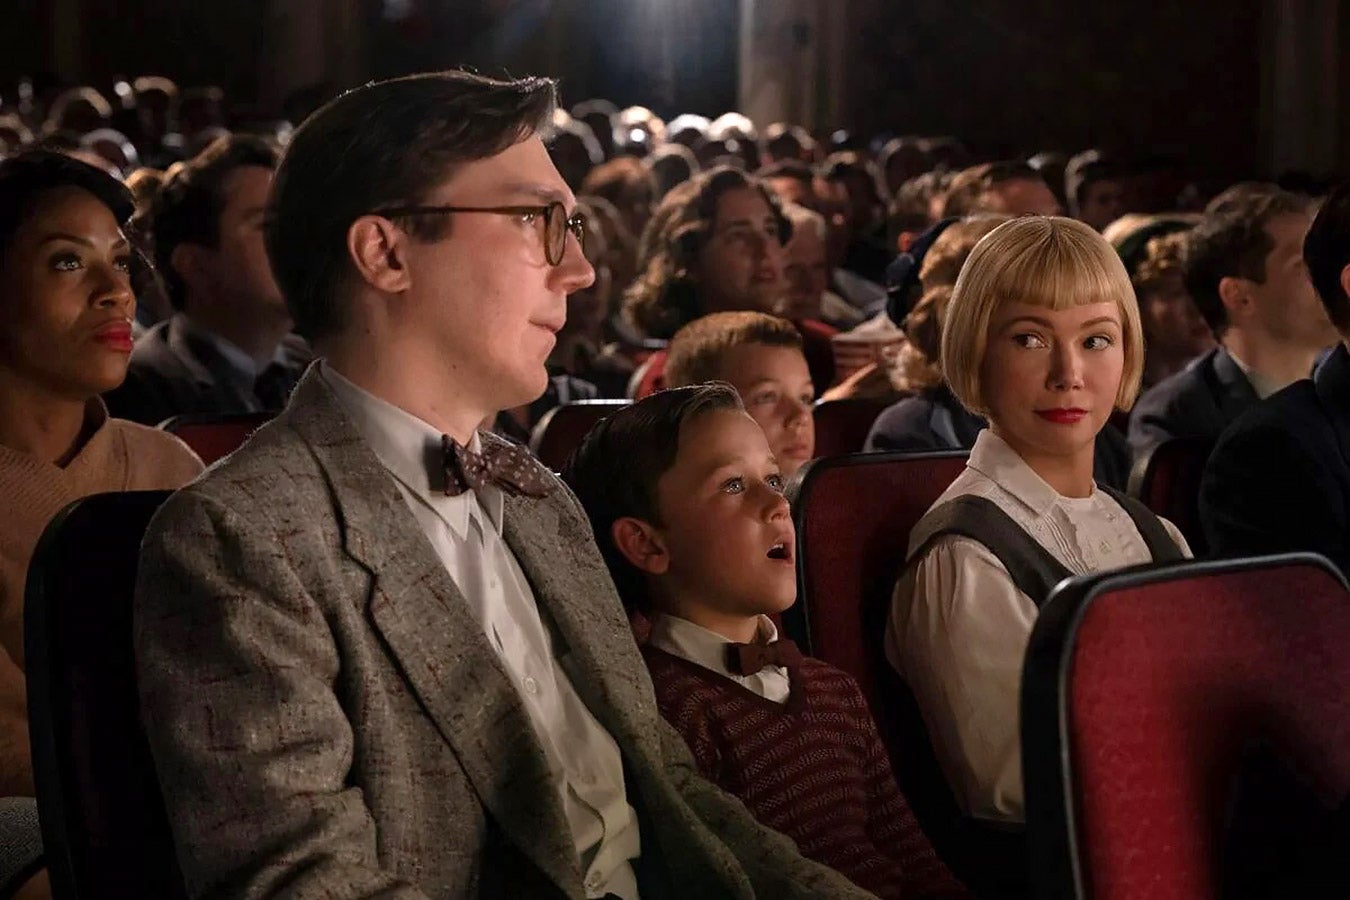 A family of three in 1950s garb watch a movie in a movie theater.